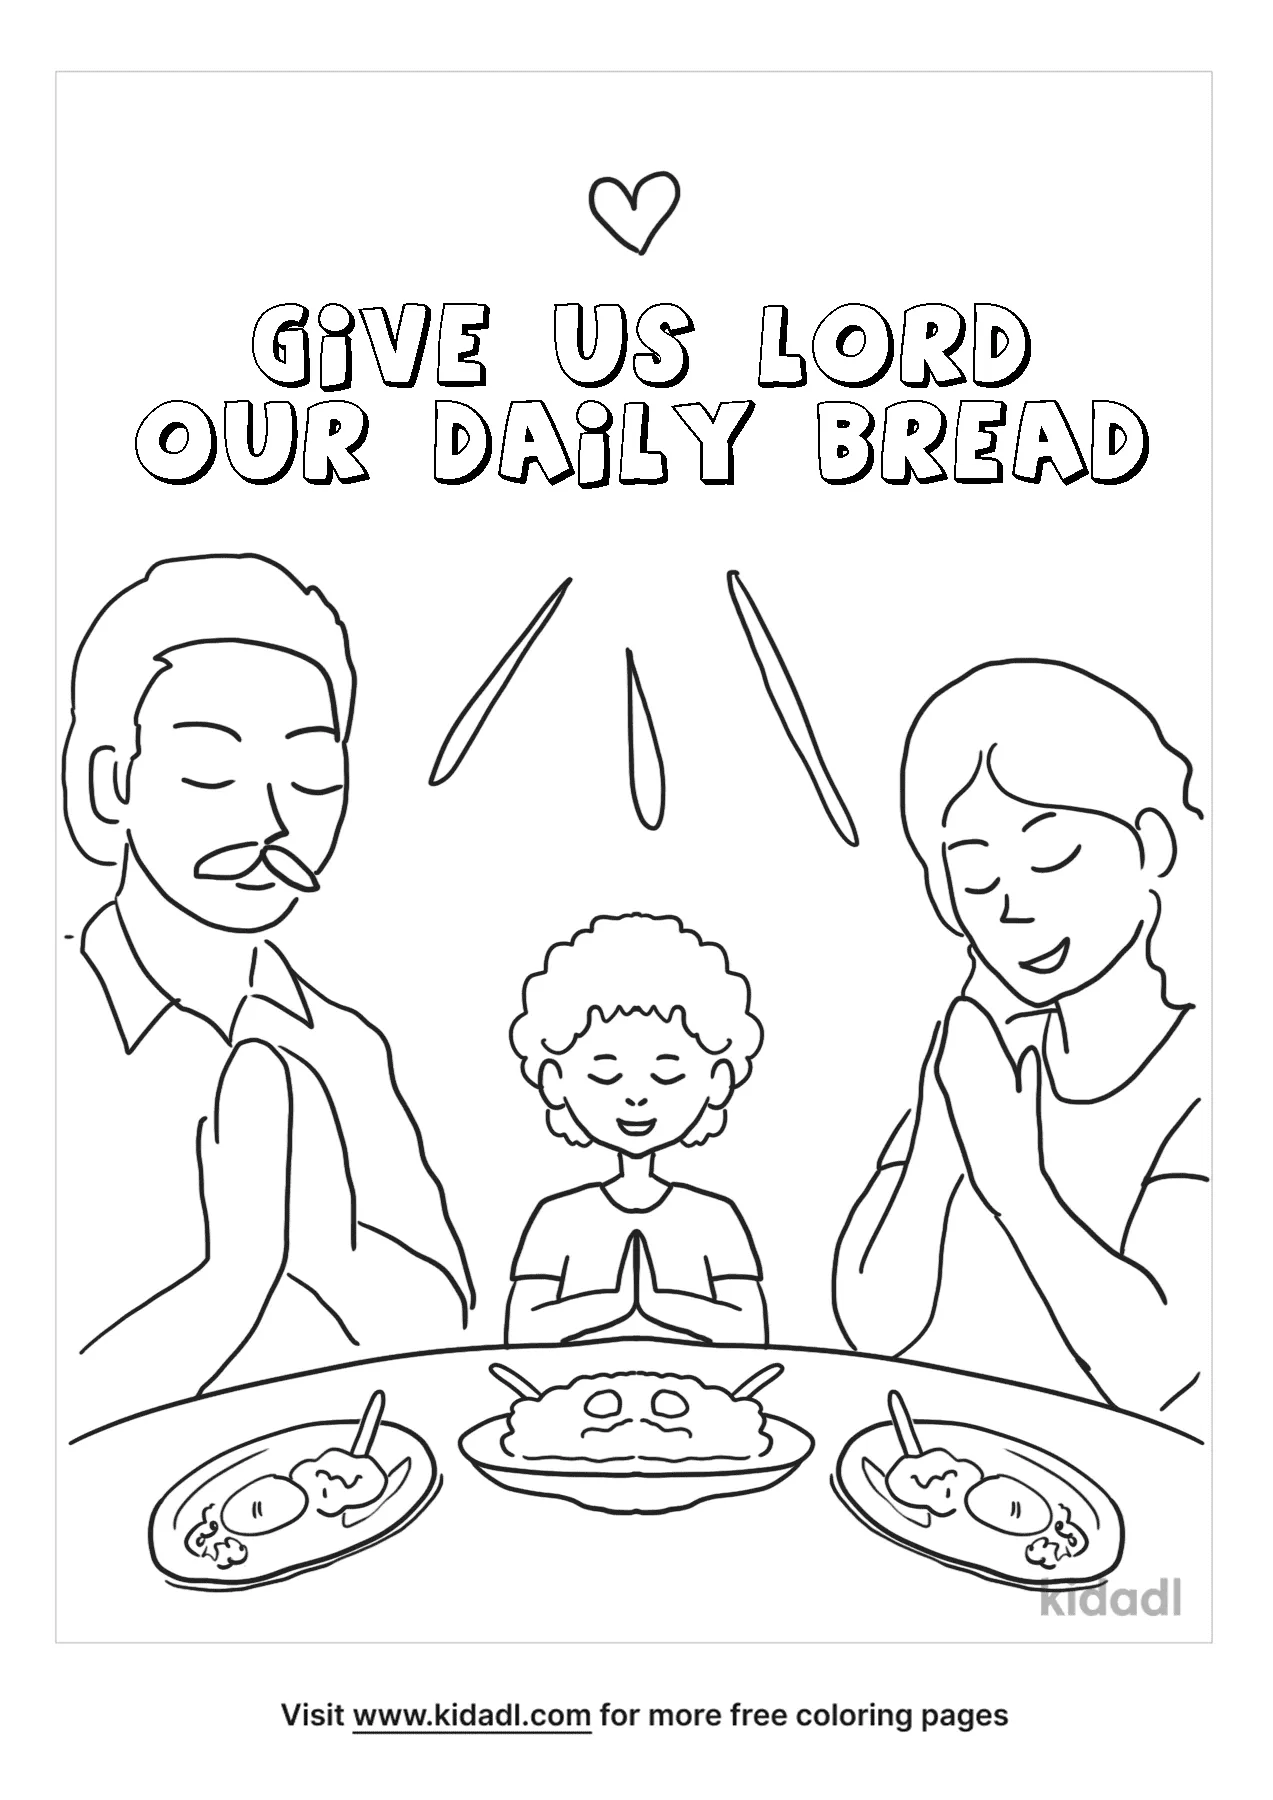 Give Us Lord Our Daily Bread Coloring Page